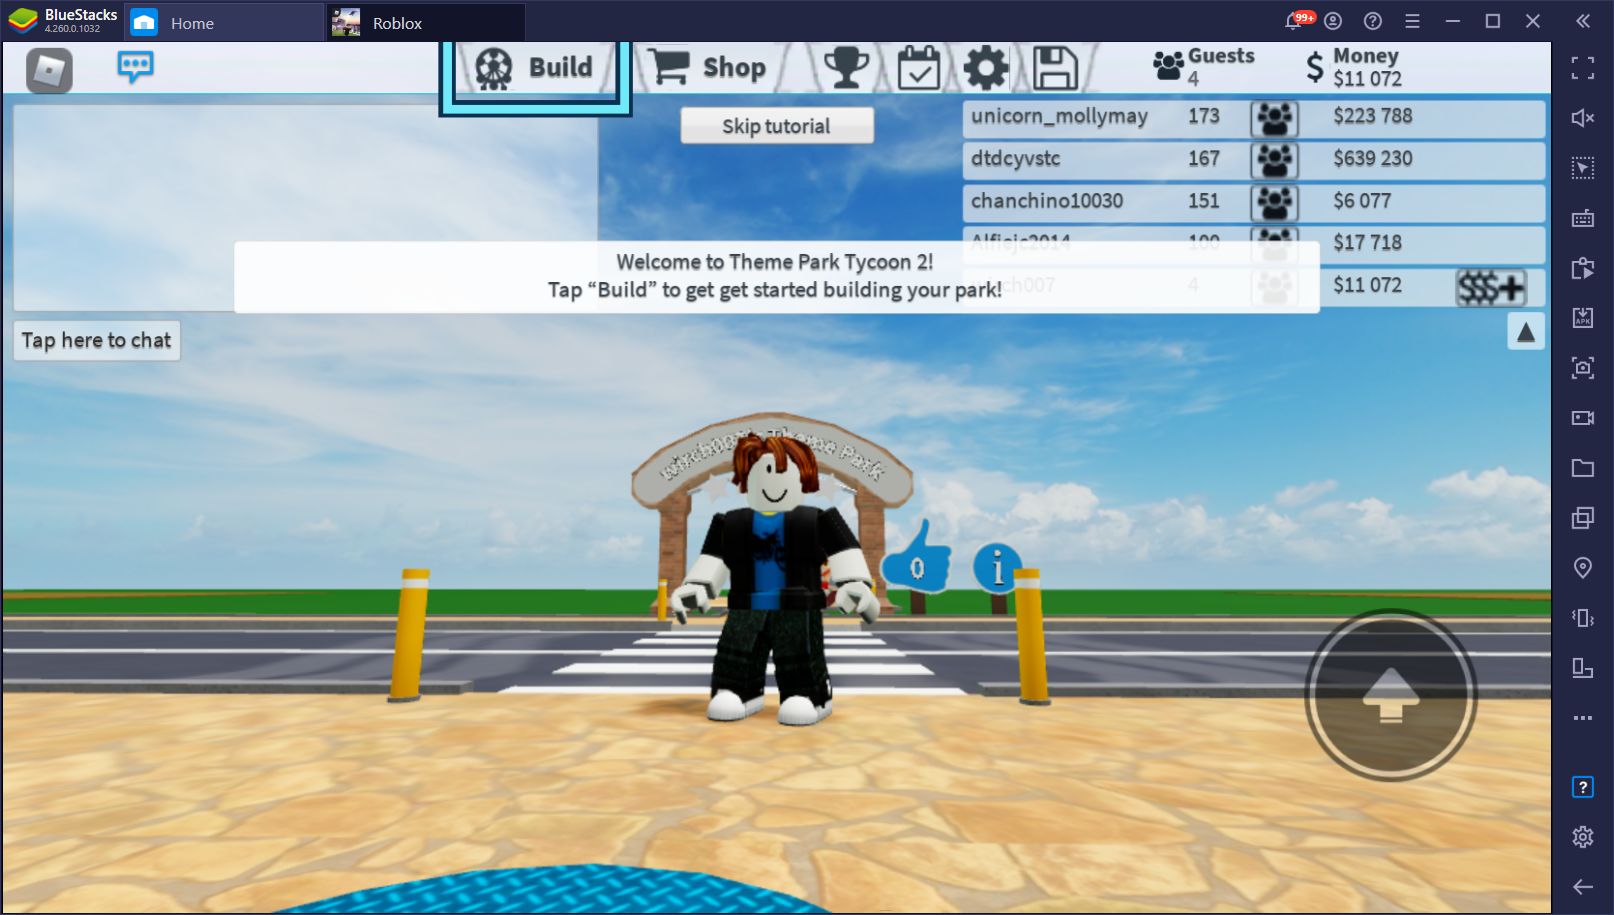 The Best Roblox Games To Play In 2021 Bluestacks - 223 id roblox